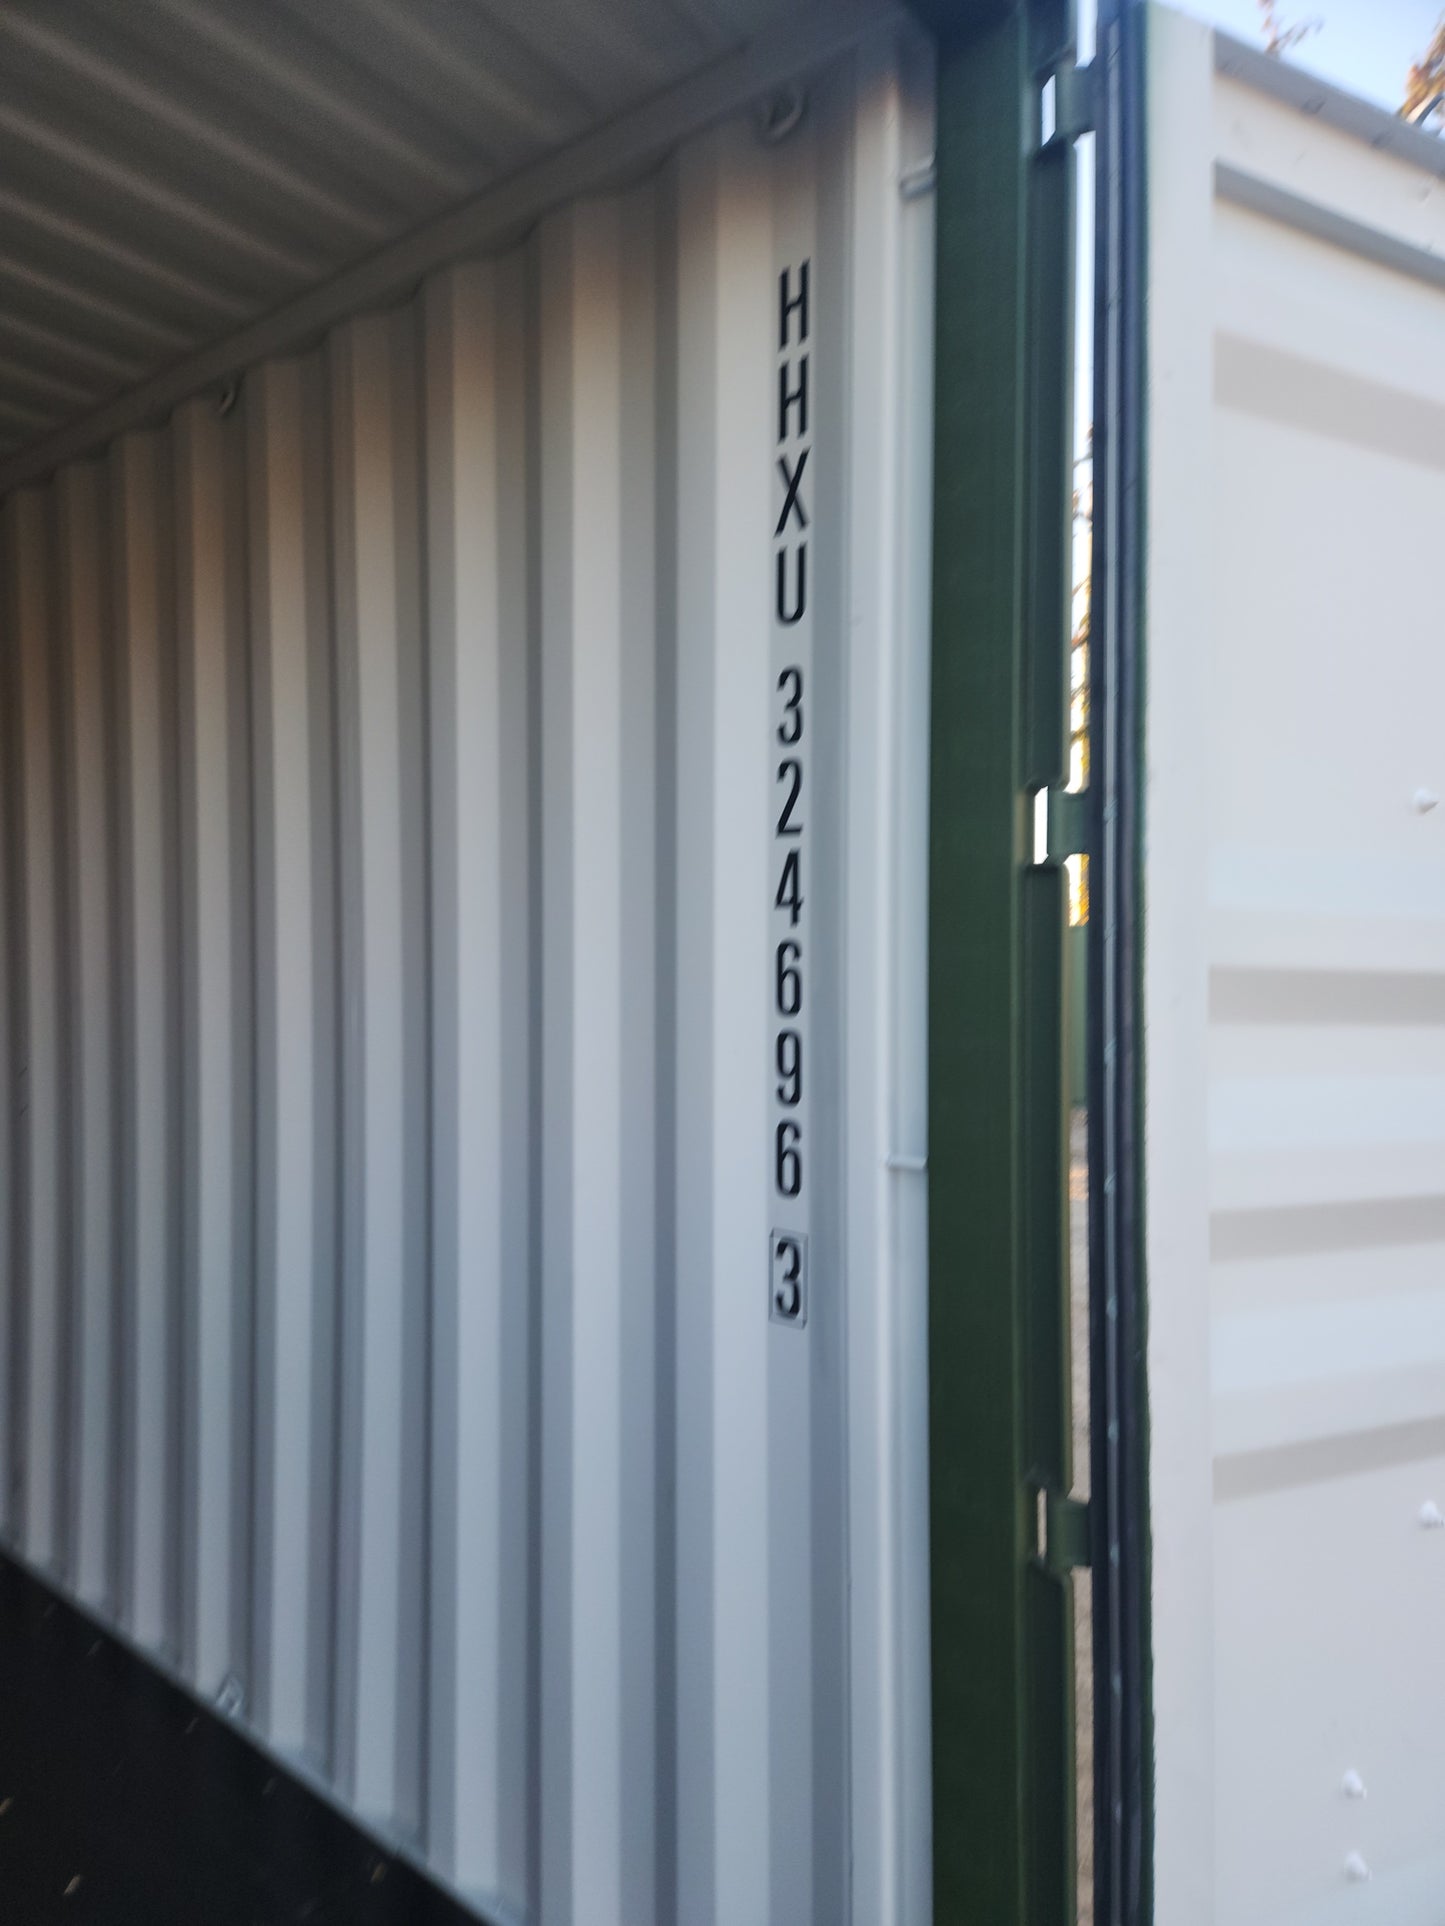 NEW 20FT HIGH CUBE SHIPPING / SEA CONTAINERS